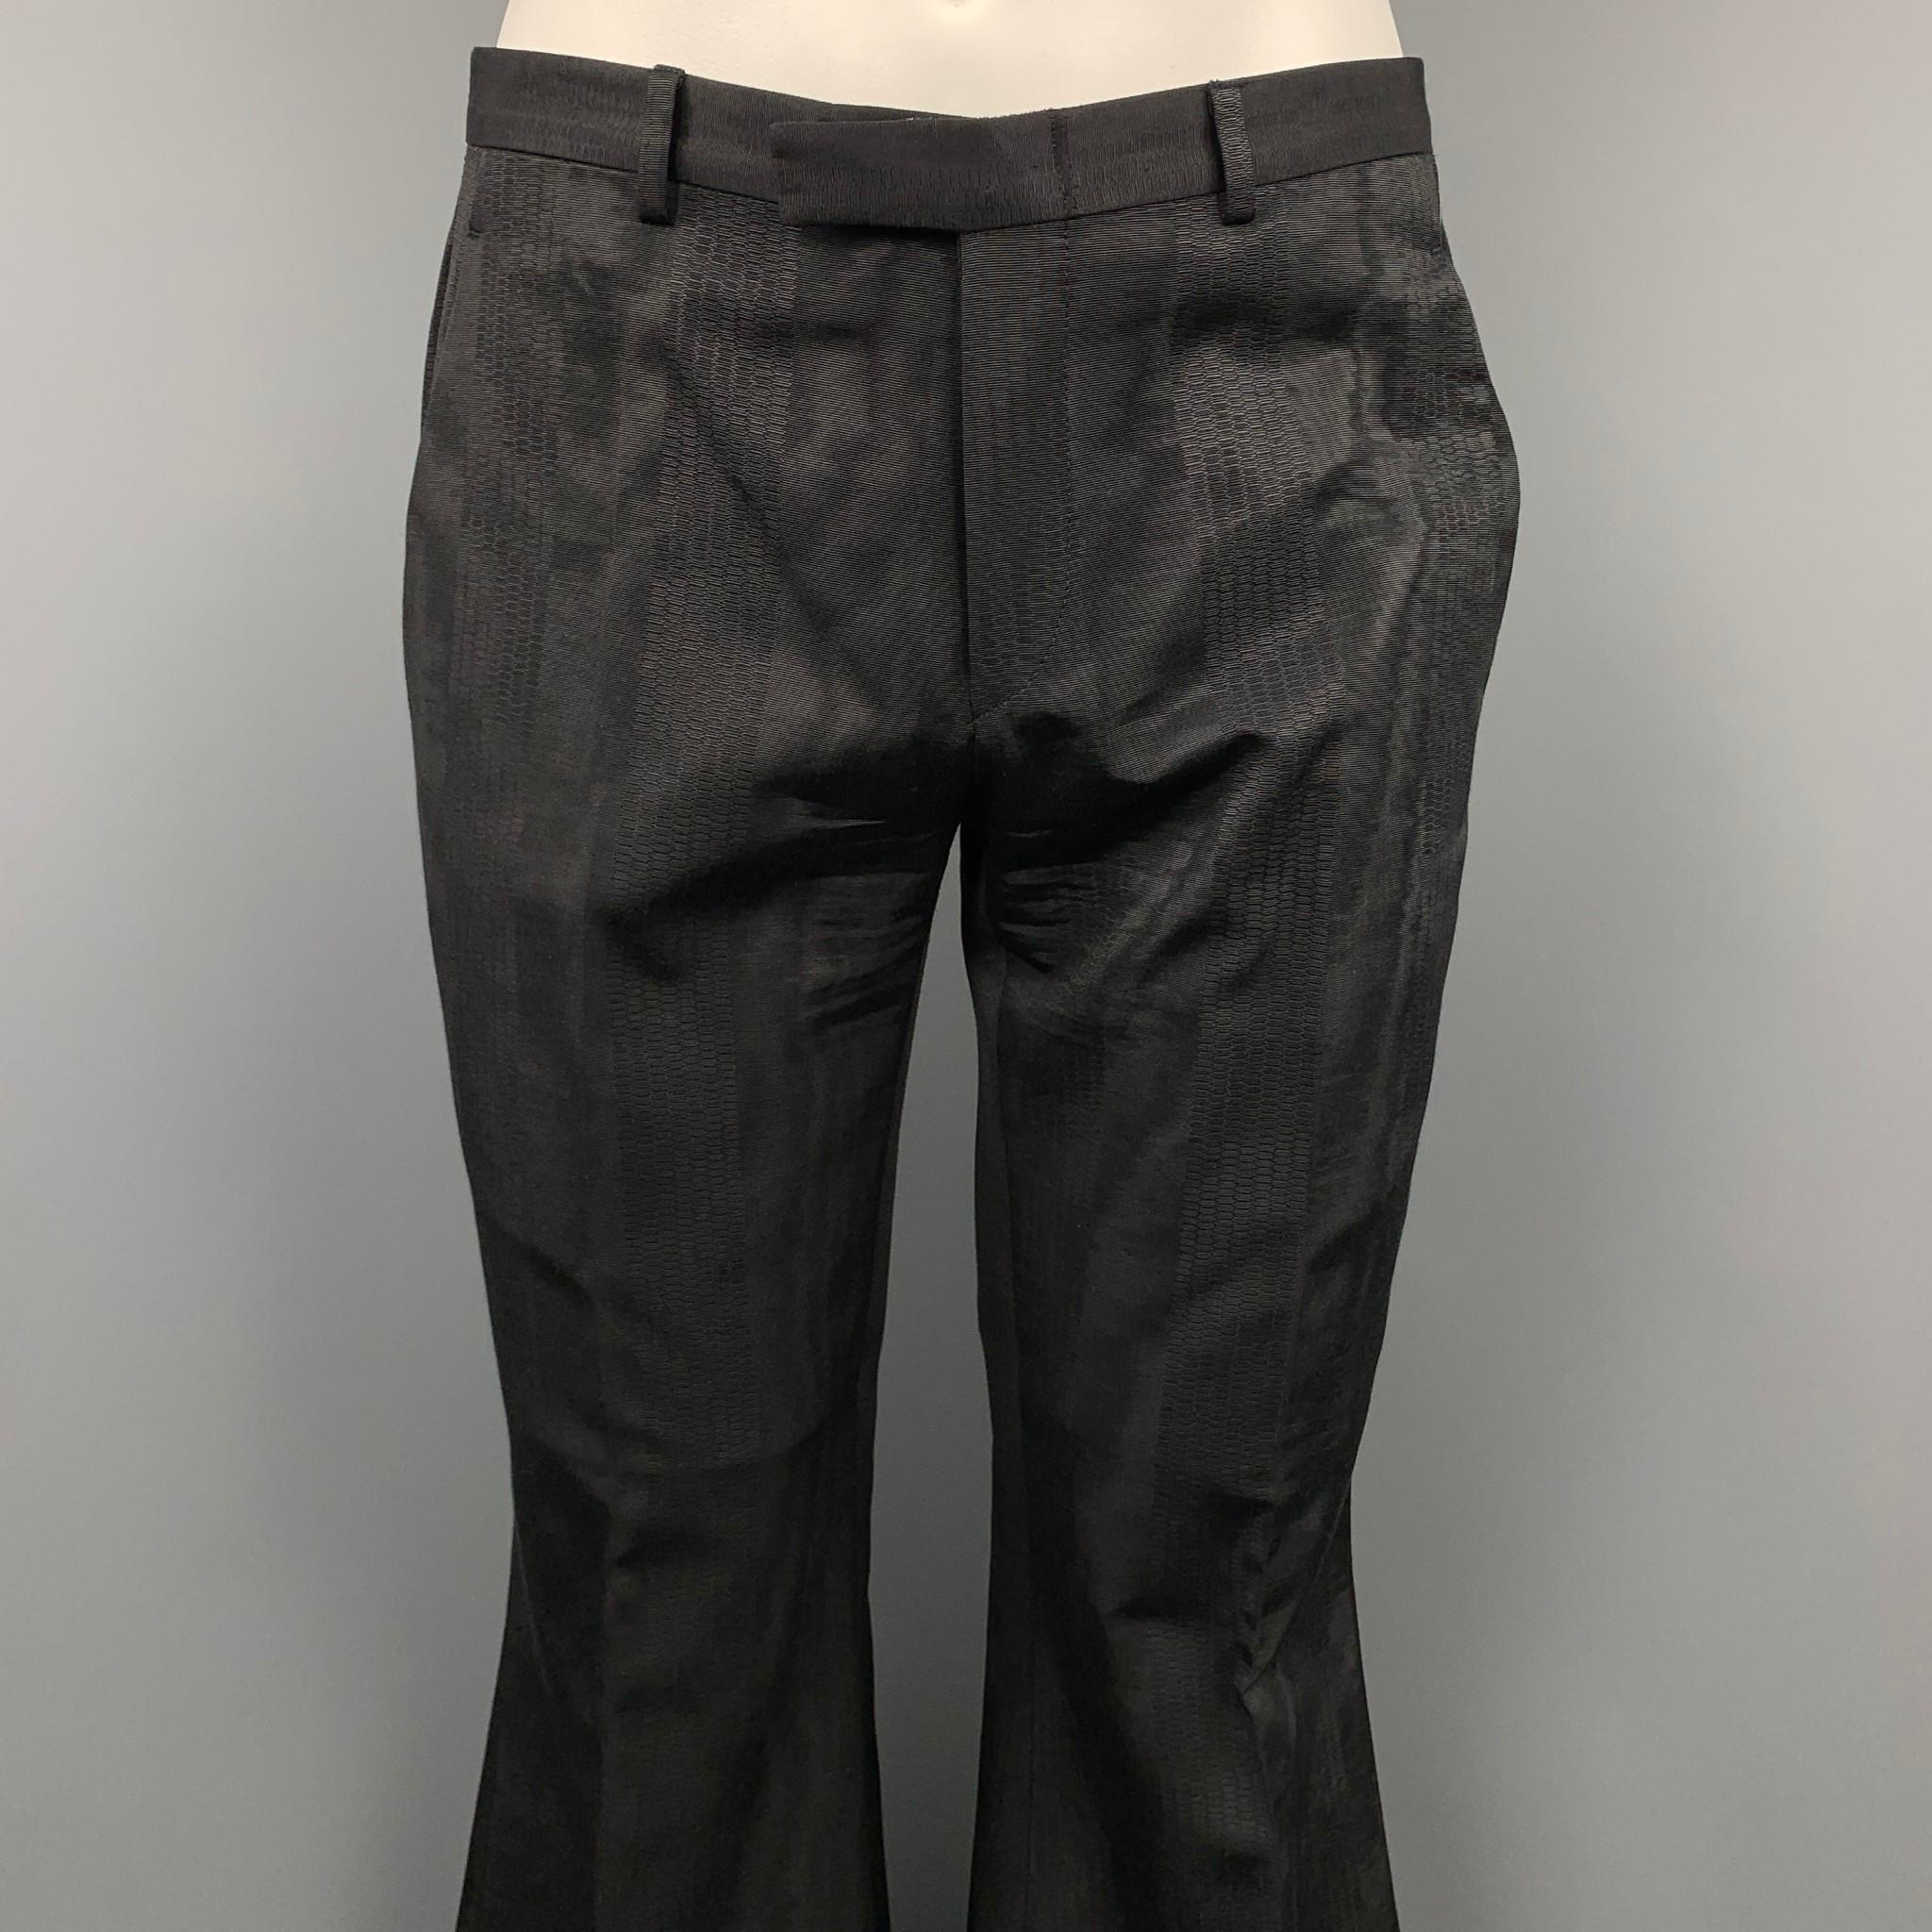 GUCCI by TOM FORD dress pants comes in a black jacquard material featuring a wide leg style, front tab, and a zip fly closure. Missing fabric tag.

Very Good Pre-Owned Condition.
Marked: No fabric tag.

Measurements:

Waist: 32 in.
Rise: 9